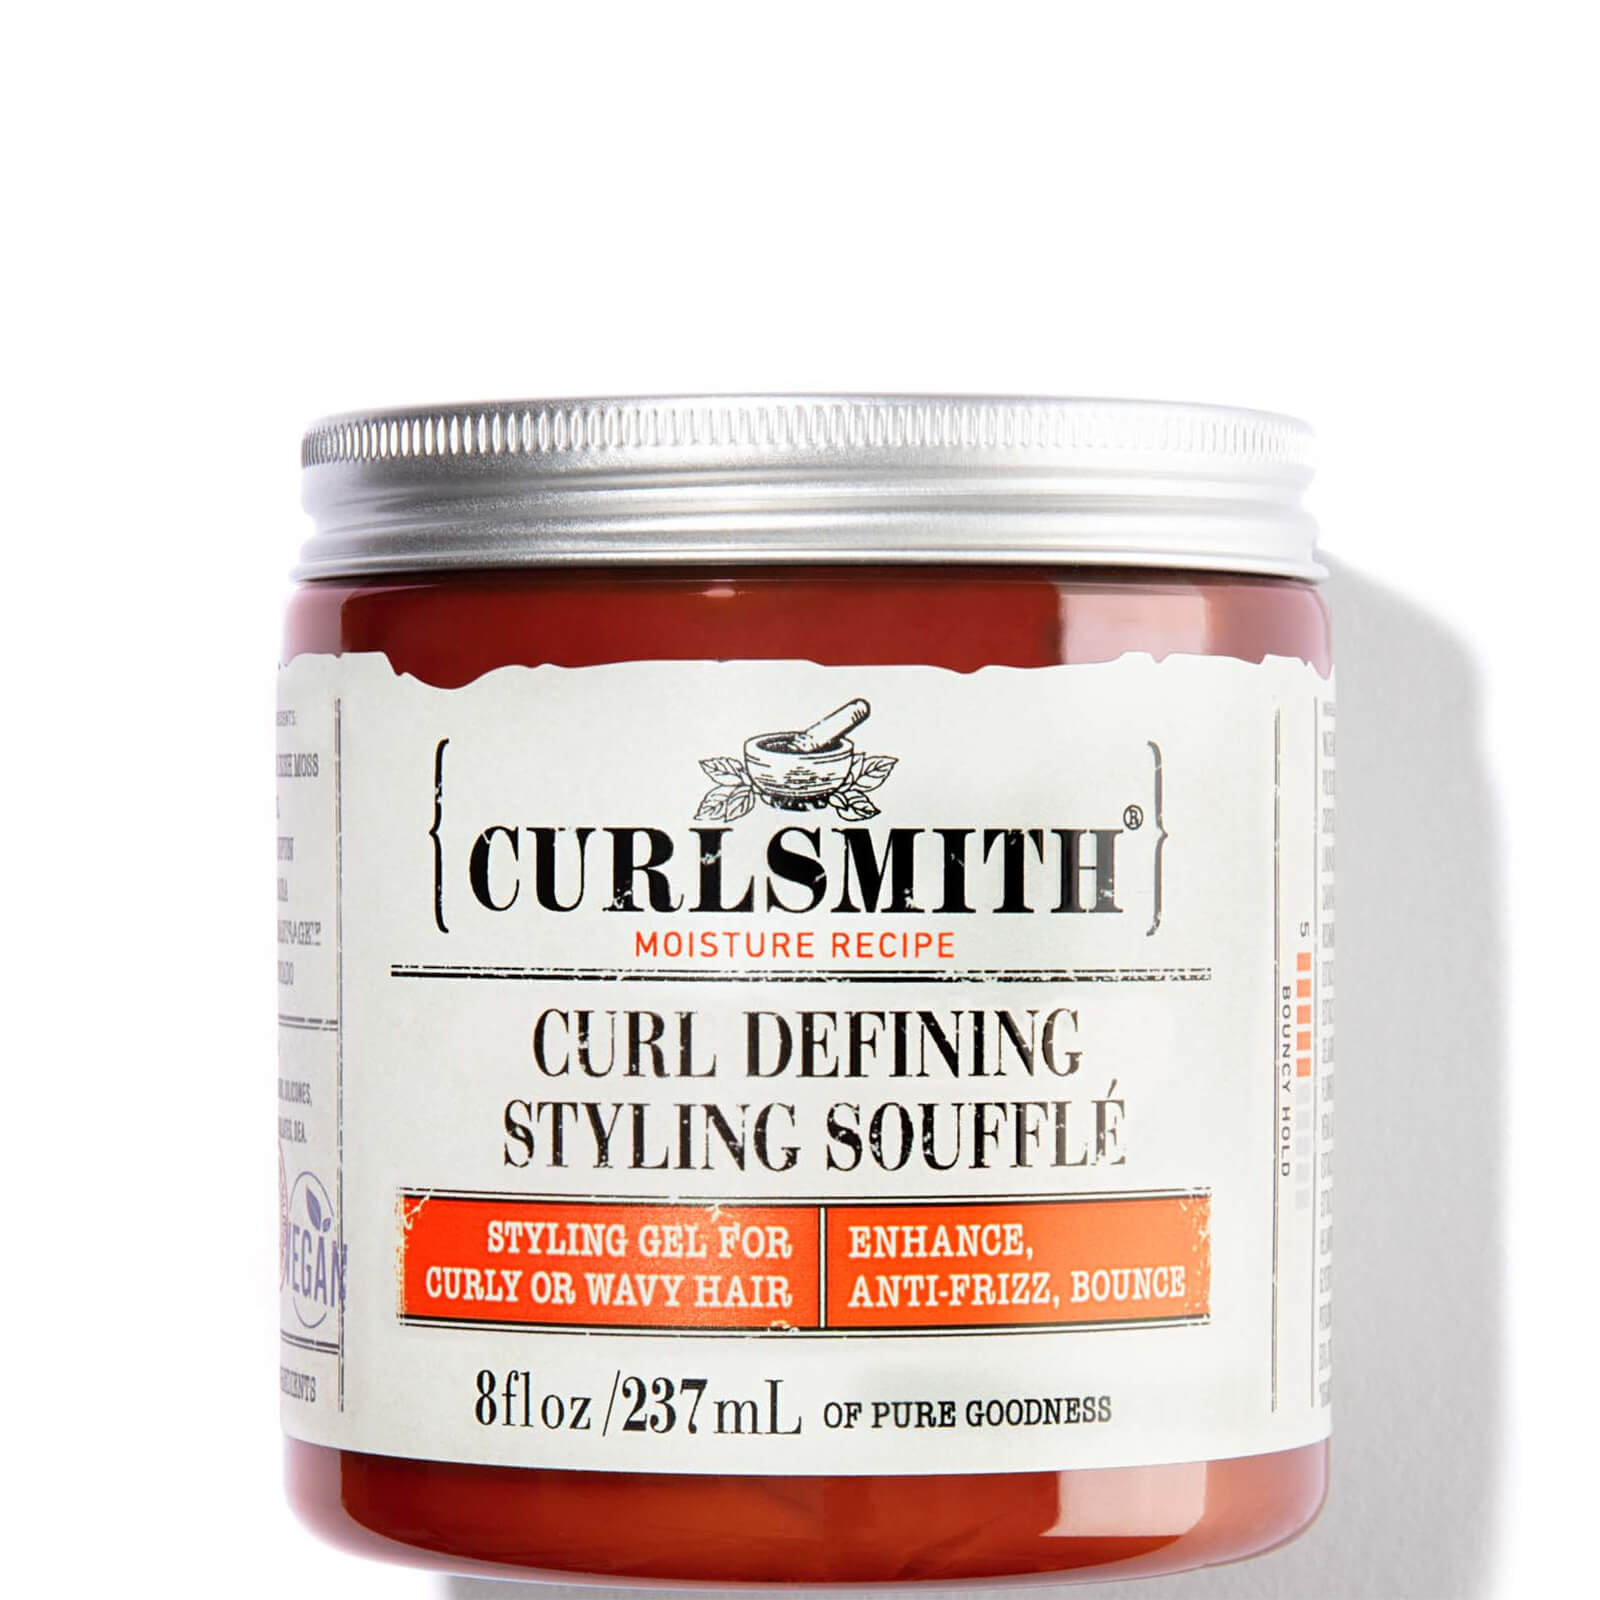 Photos - Hair Styling Product Curlsmith Curl Defining Styling Soufflé 237ml 36223840326